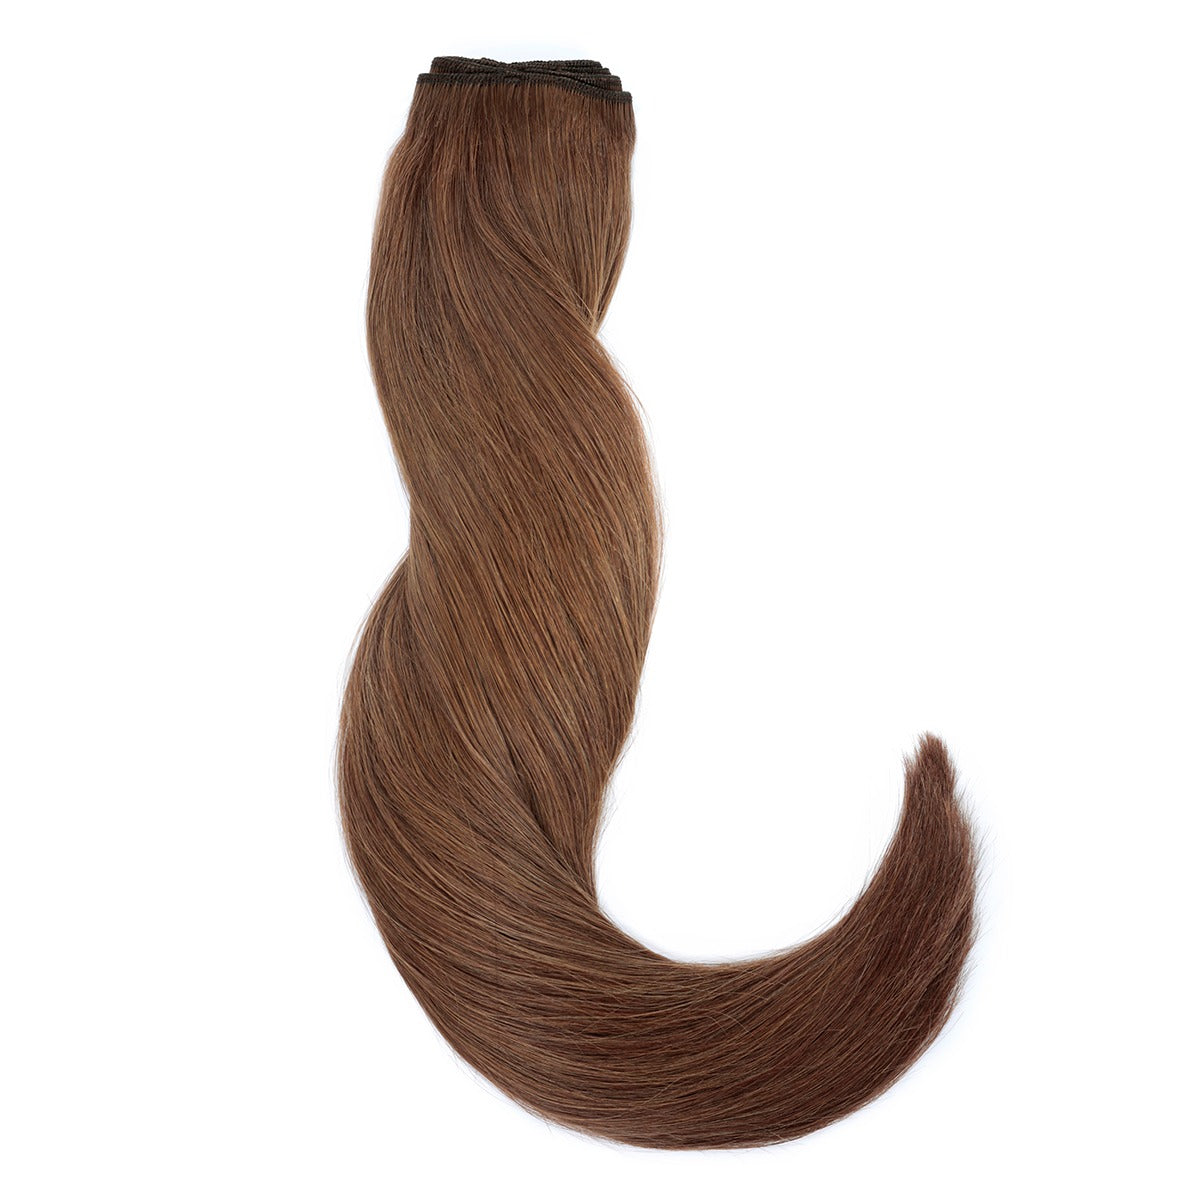 STARDUST Straight Weft #5 (Chocolate Brown) Hair Extensions